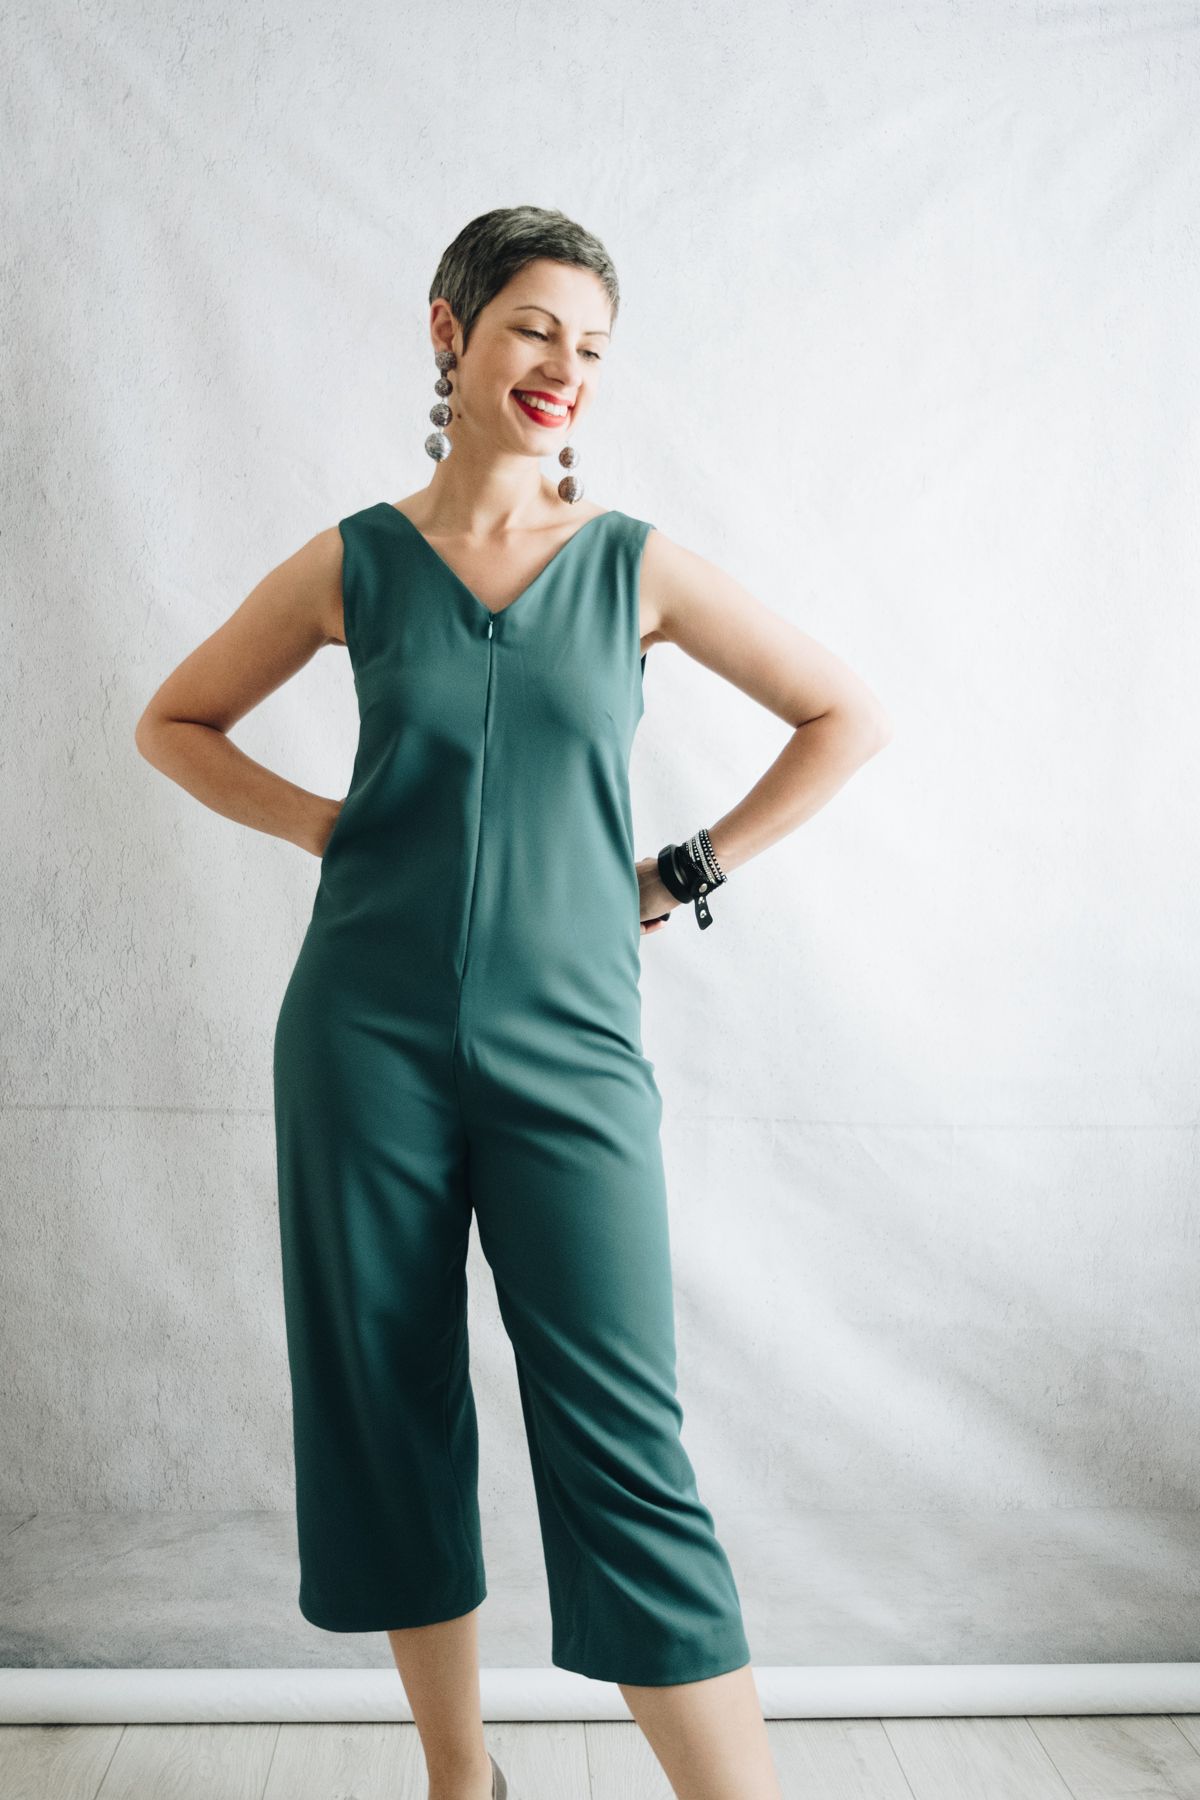 DIY Emerald fitted jumpsuit, with v-neck back and front neckline, front zipper and tie back.
Sewing pattern: Fibre Mood Danika